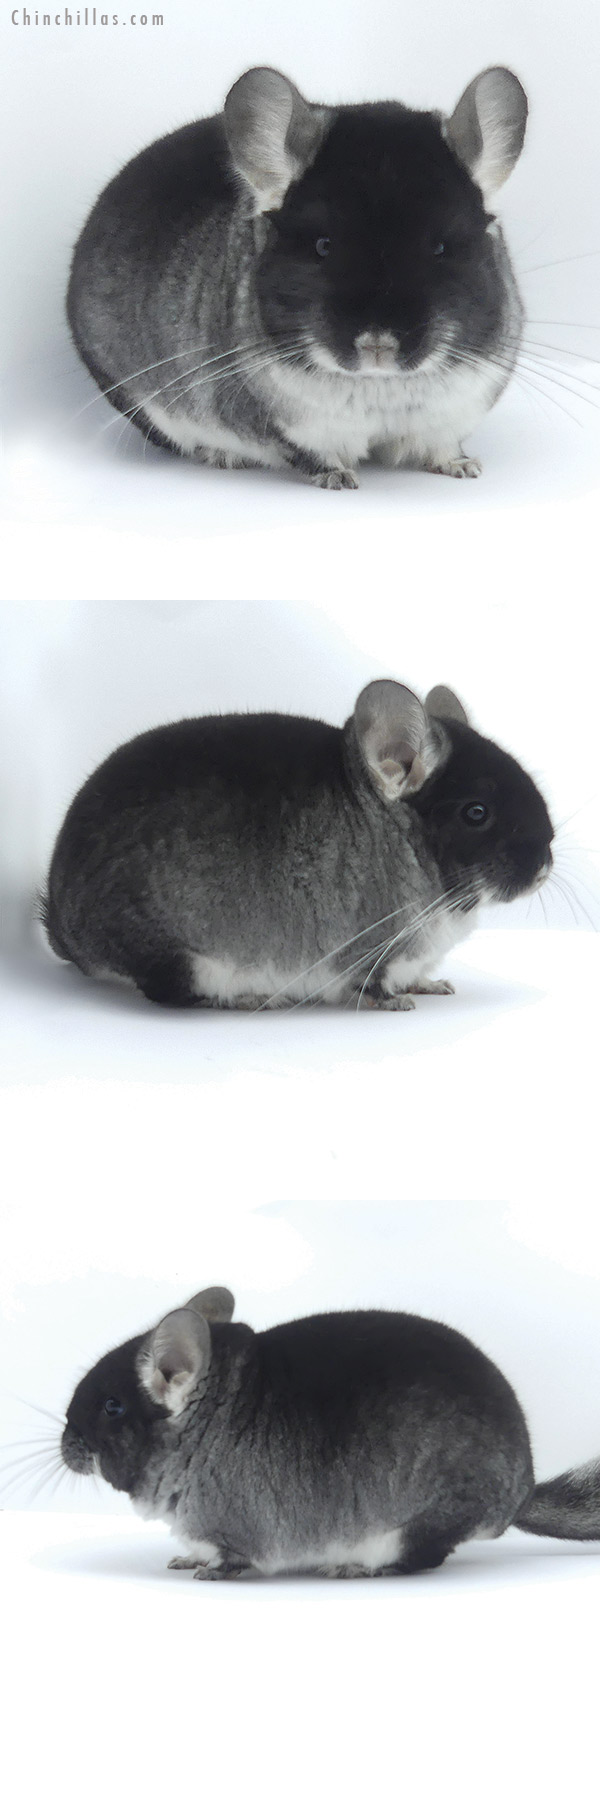 Chinchilla or related item offered for sale or export on Chinchillas.com - 19398 Brevi Type Show Quality Black Velvet Male Chinchilla